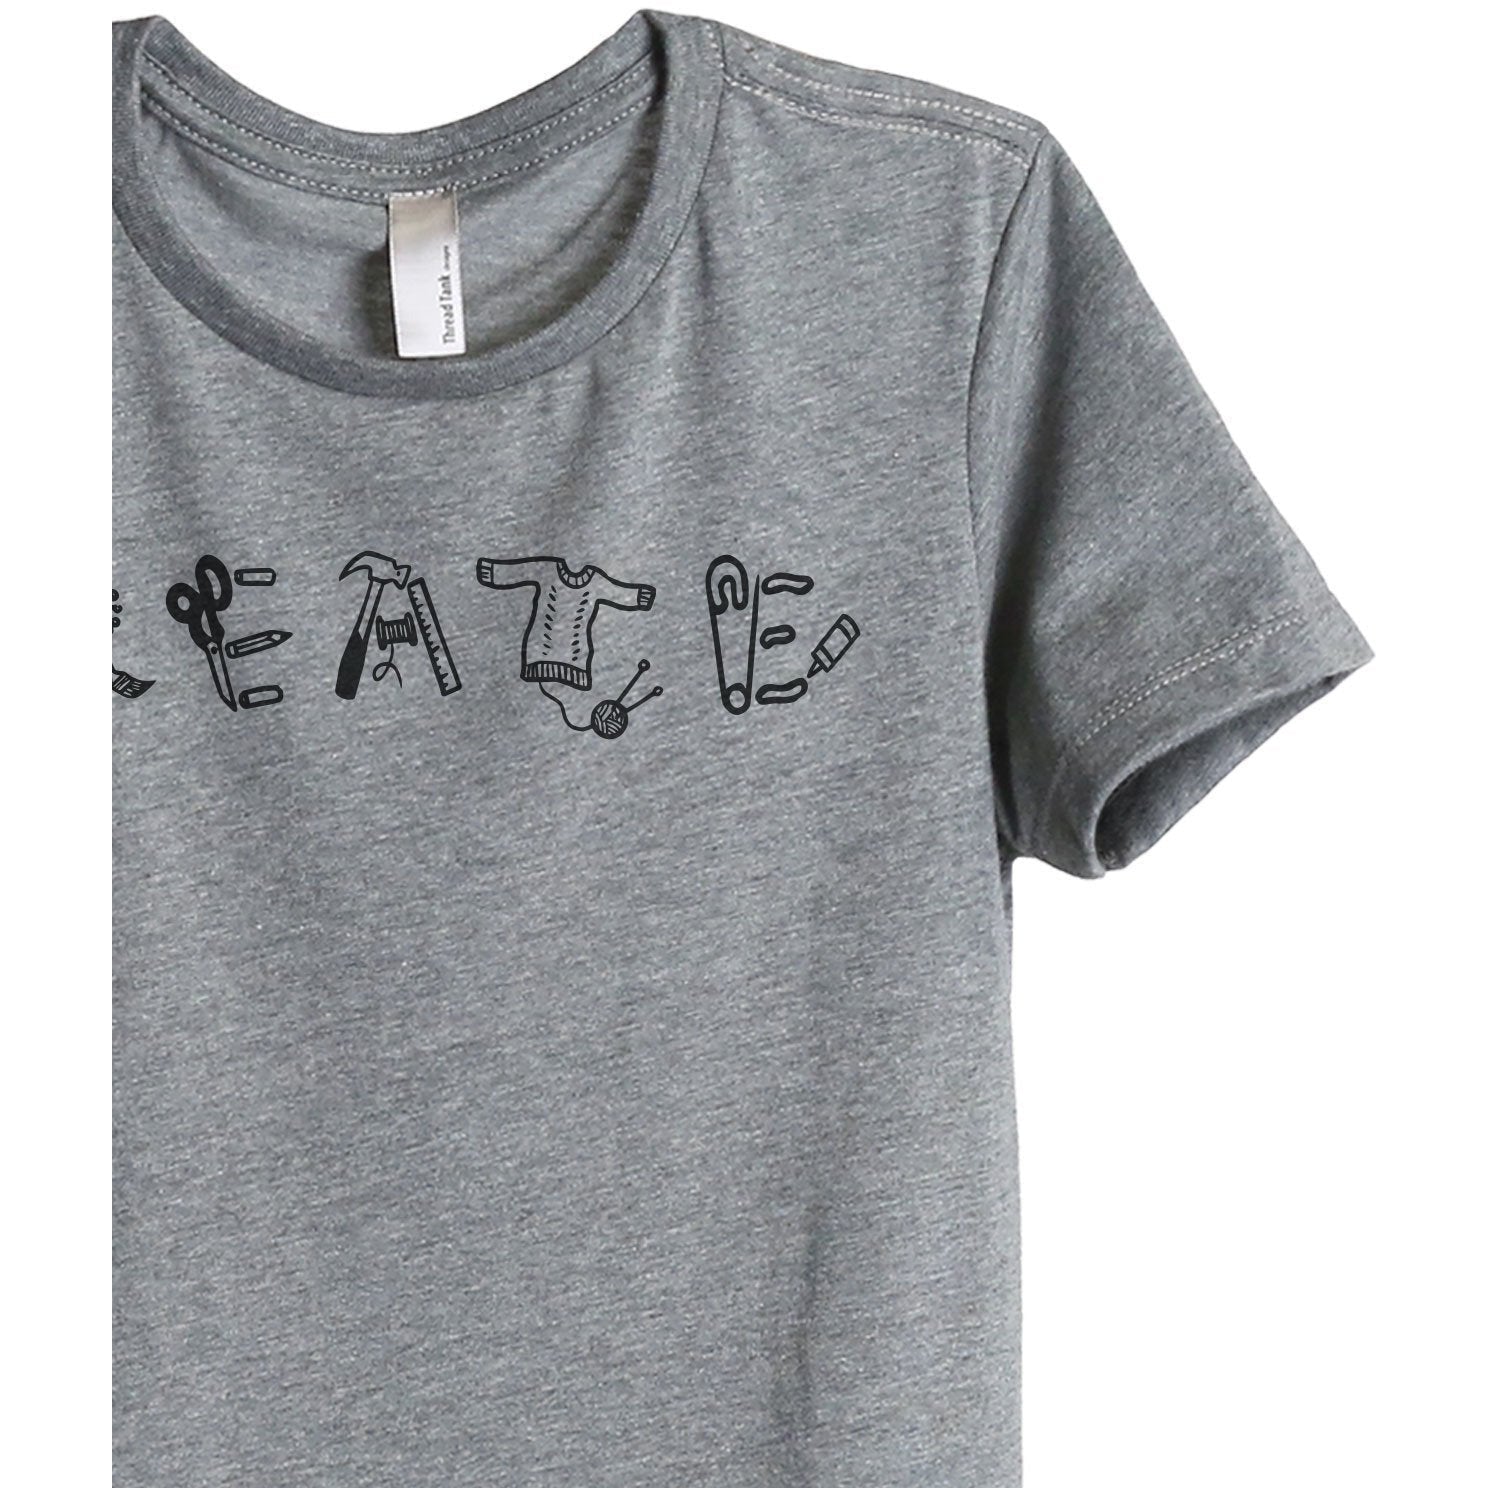 Create Women's Relaxed Crewneck T-Shirt Top Tee Heather Grey Zoom Details
